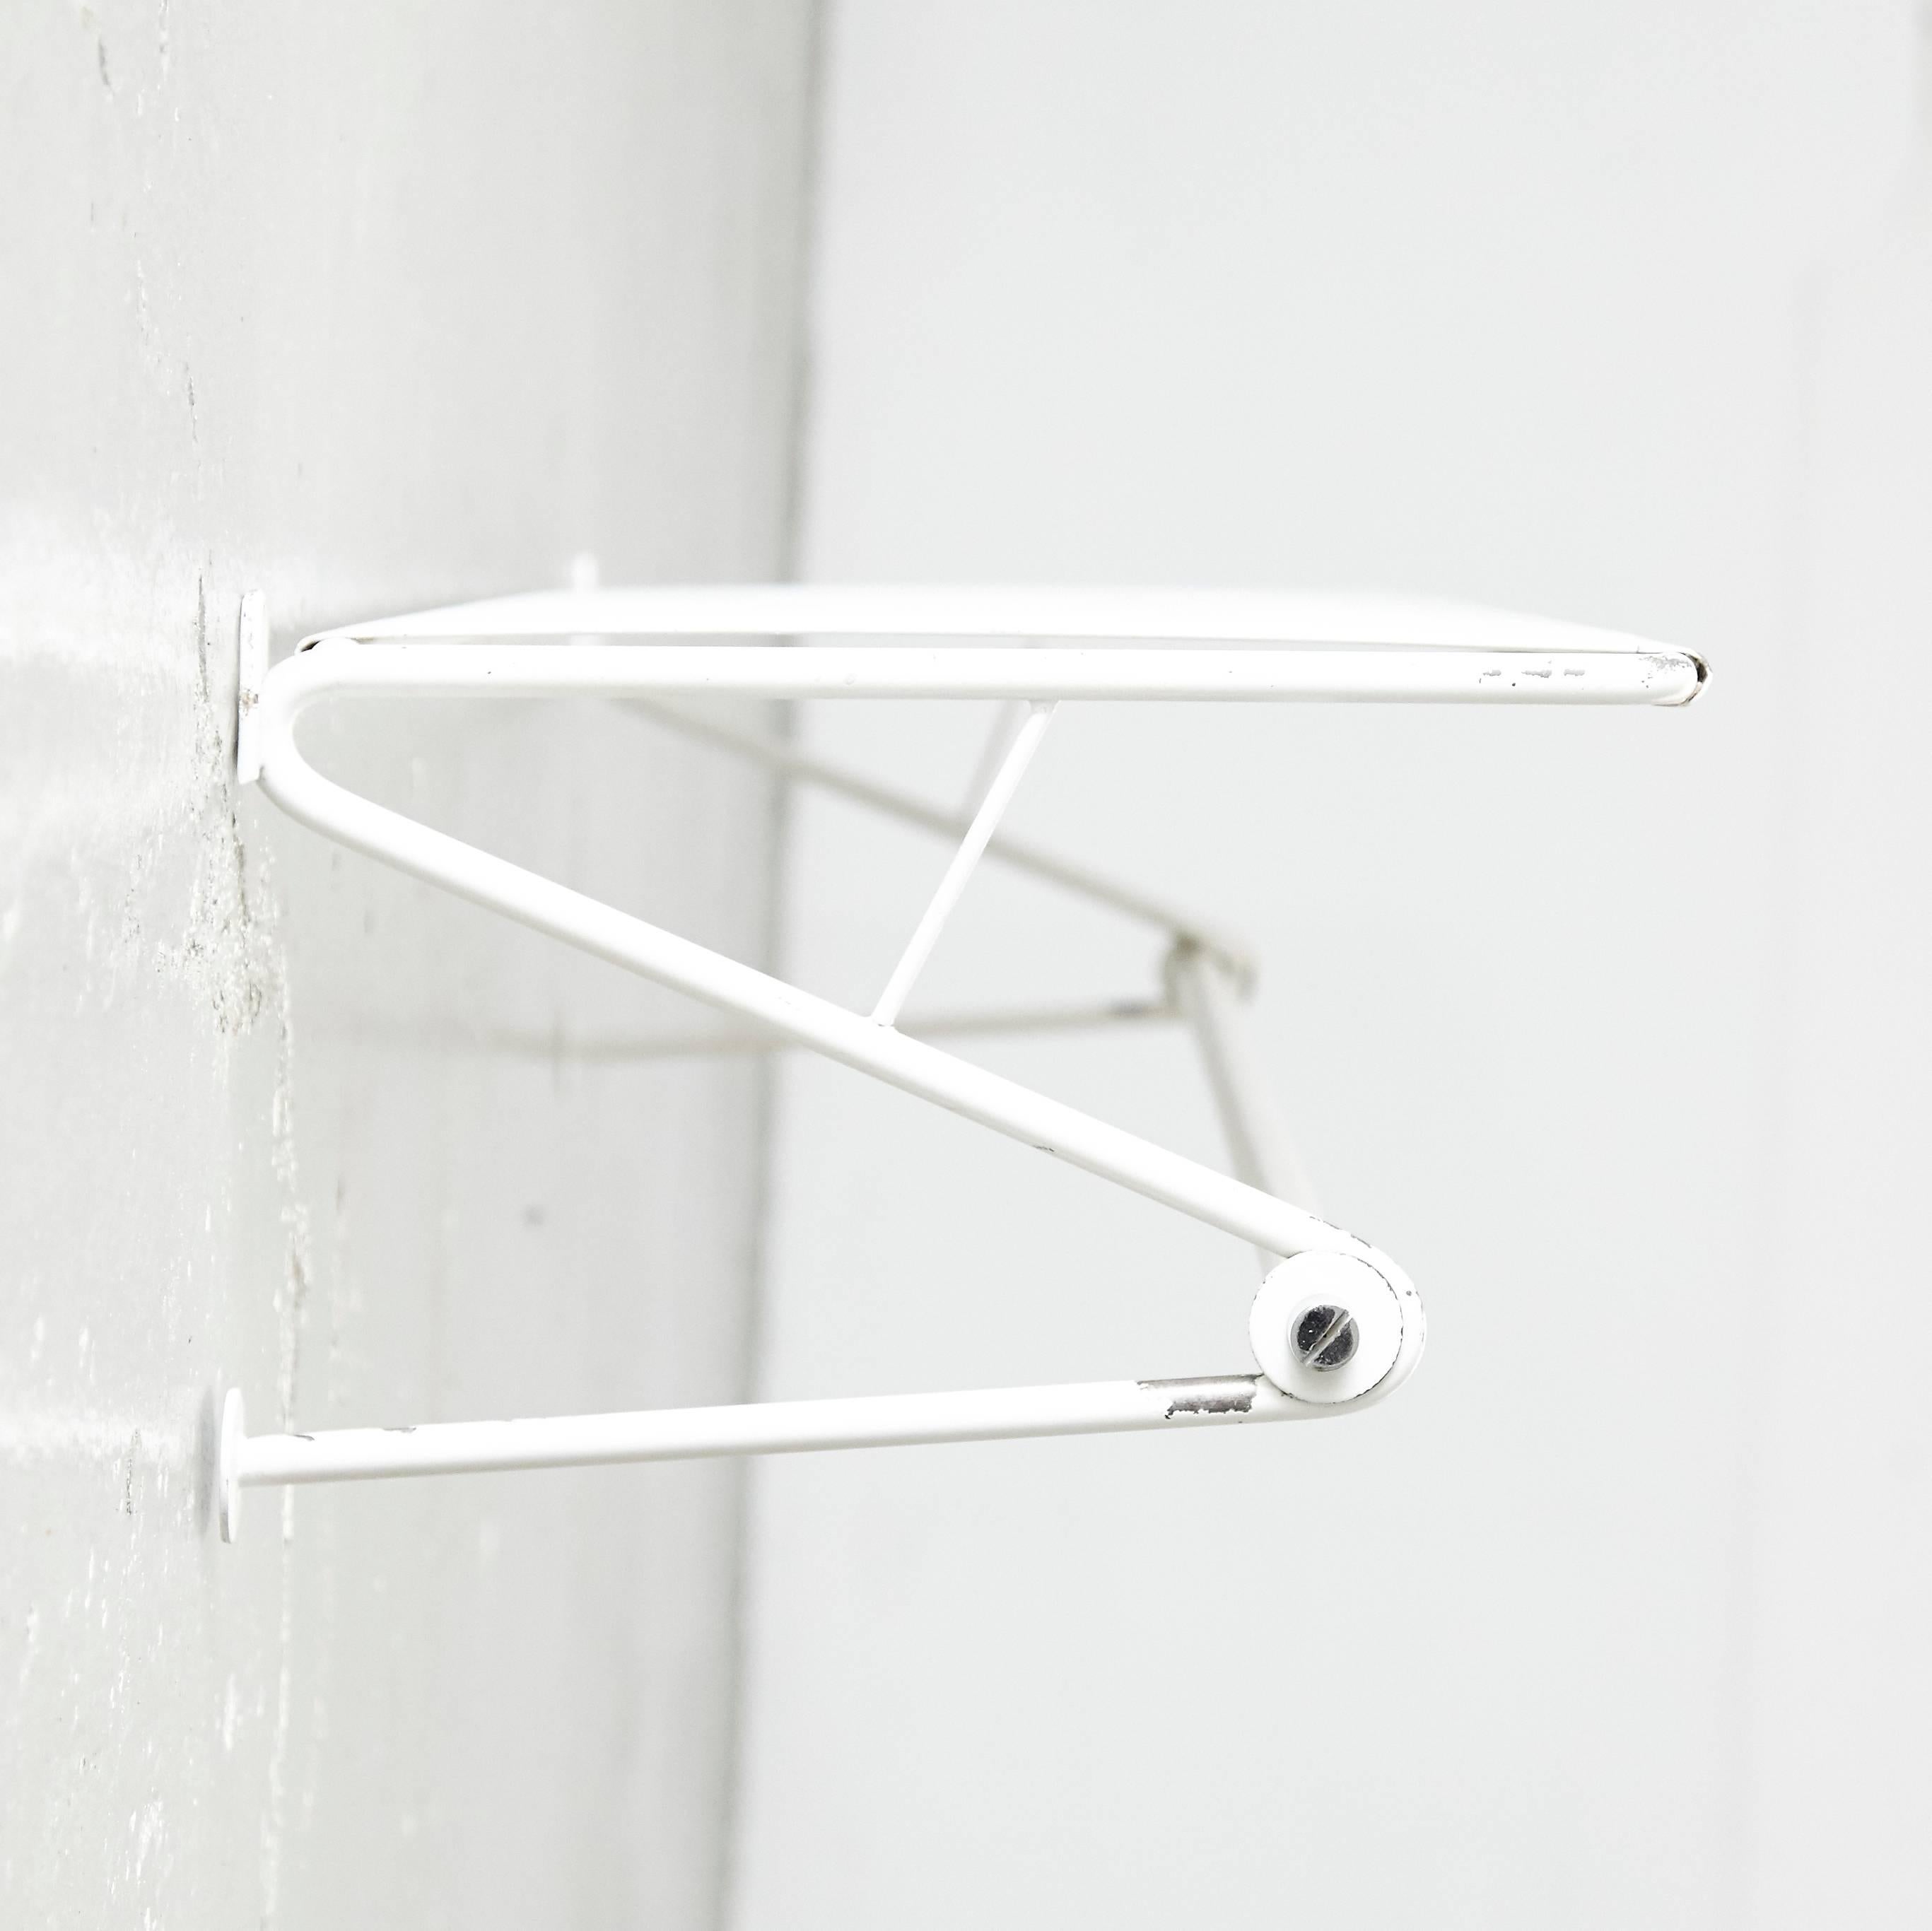 Coat rack designed by Mathieu Matégot.
Manufactured by Artimeta (Netherland), circa 1950.
Perforated, lacquered metal.

In good original condition, with minor wear consistent with age and use, preserving a beautiful patina.

Mathieu Matégot